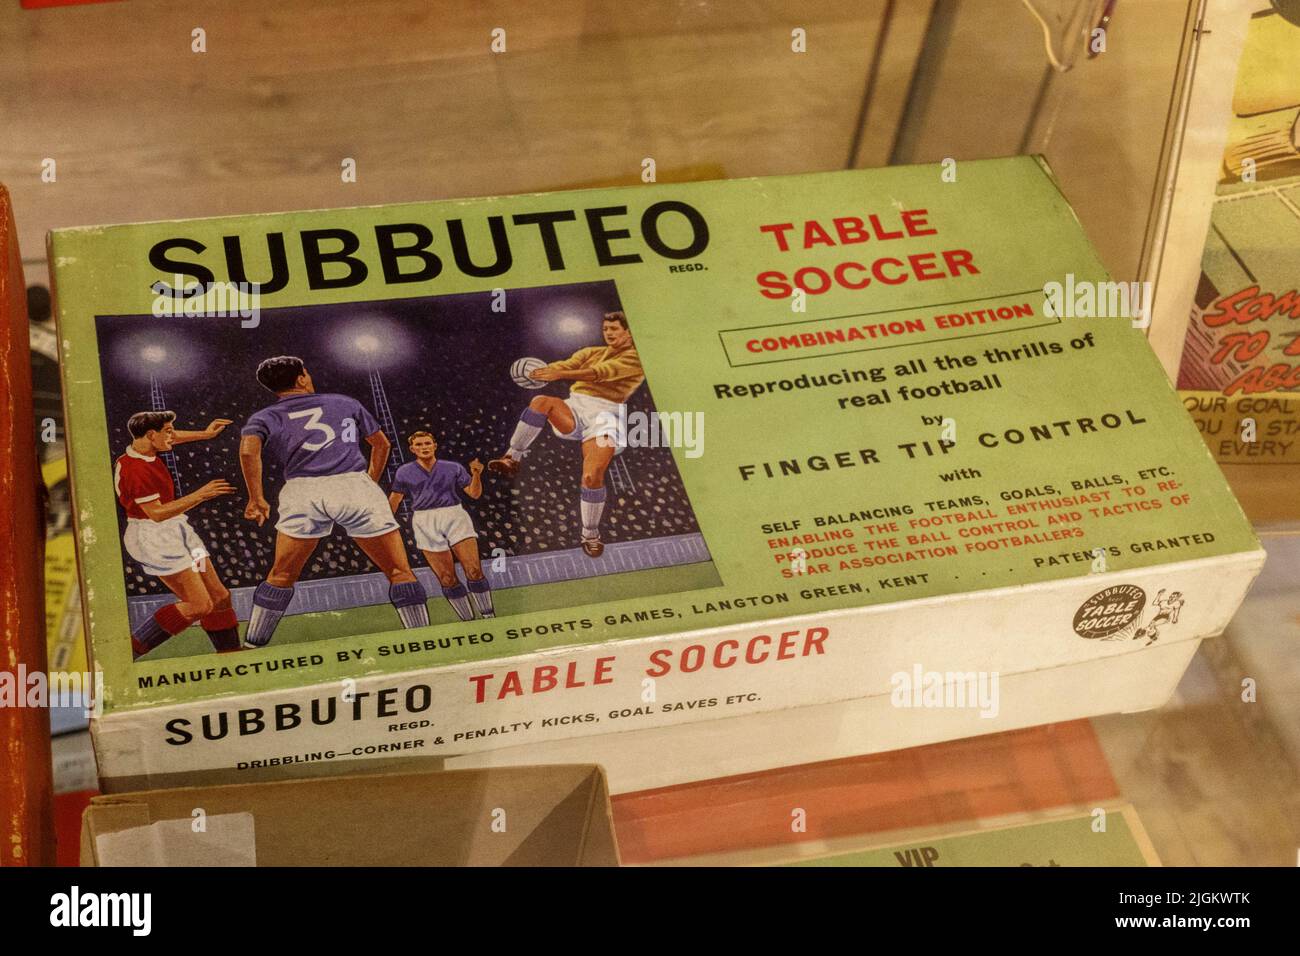 A vintage 1960s Subbuteo table soccer game box on display in a museum in the UK. Stock Photo